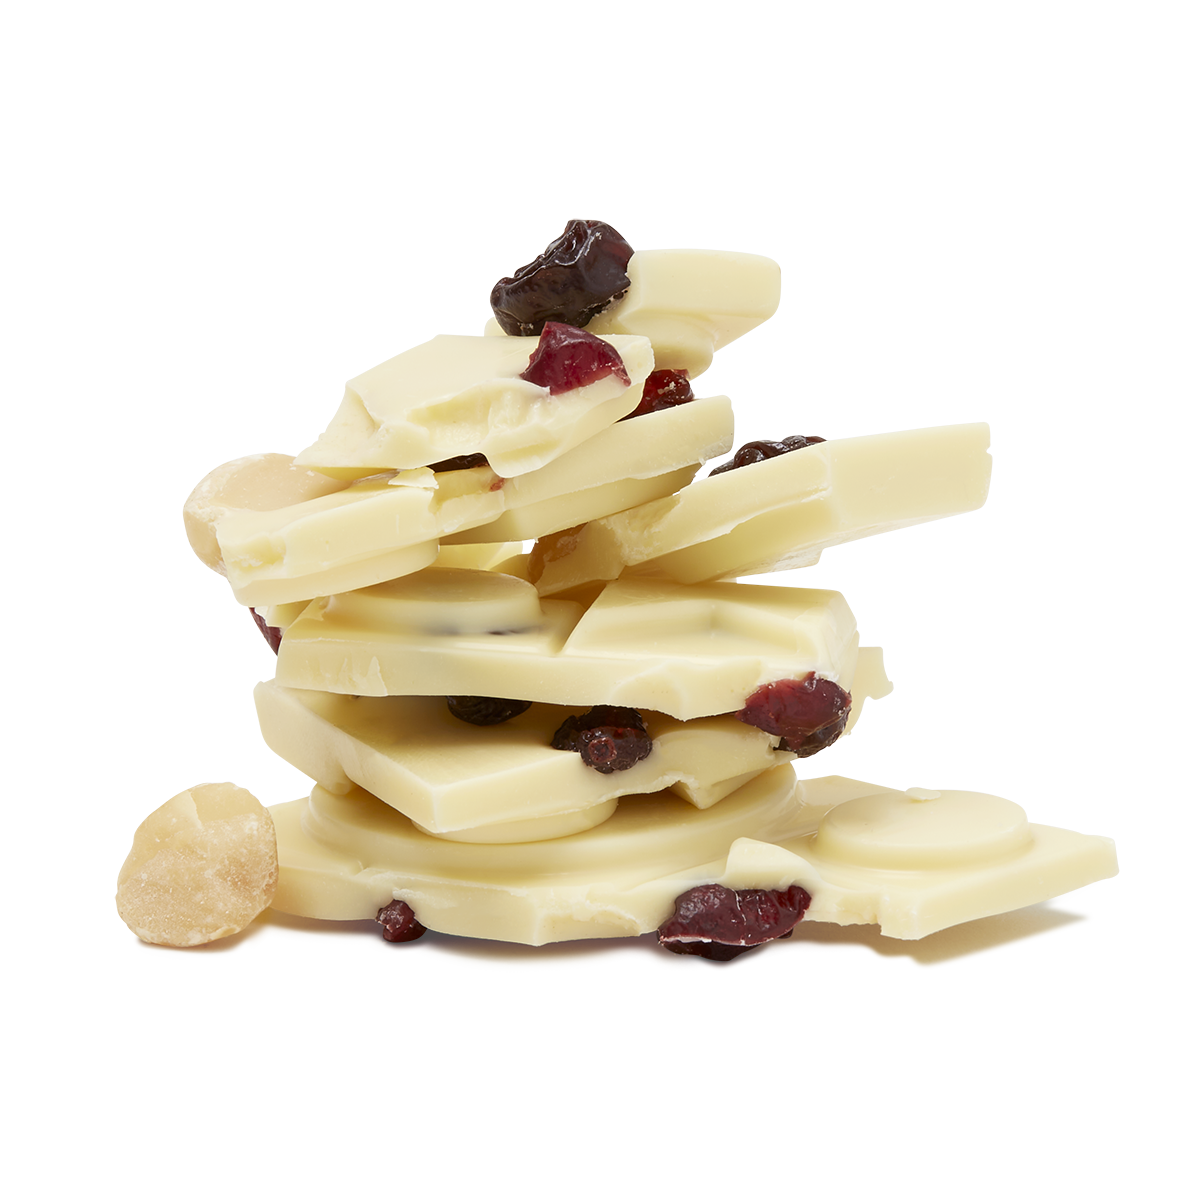 Broken white chocolate pieces stacked with dried fruit inside